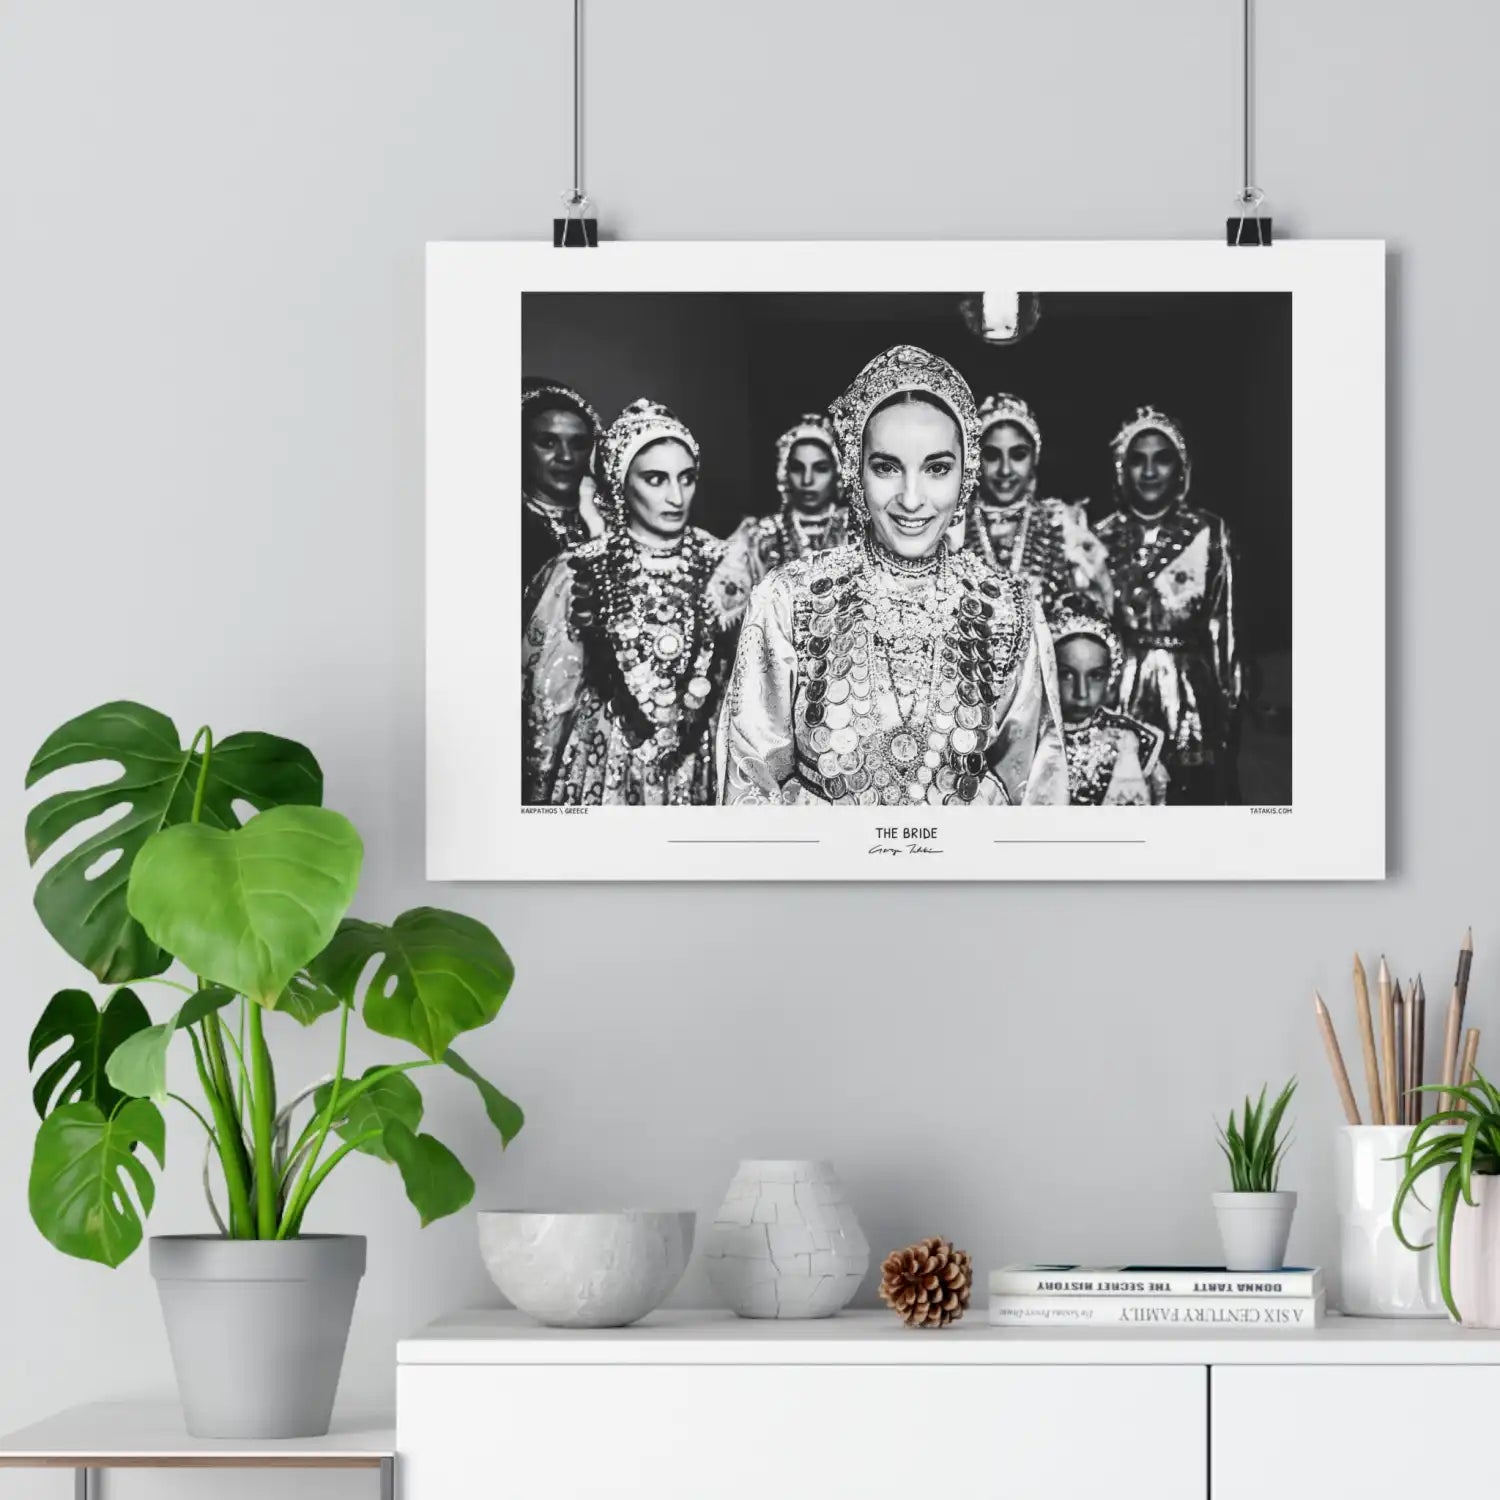 Black and White Photo Wall Art Poster from Greece | Bride in Diafani on Karpathos island, by George Tatakis - small poster